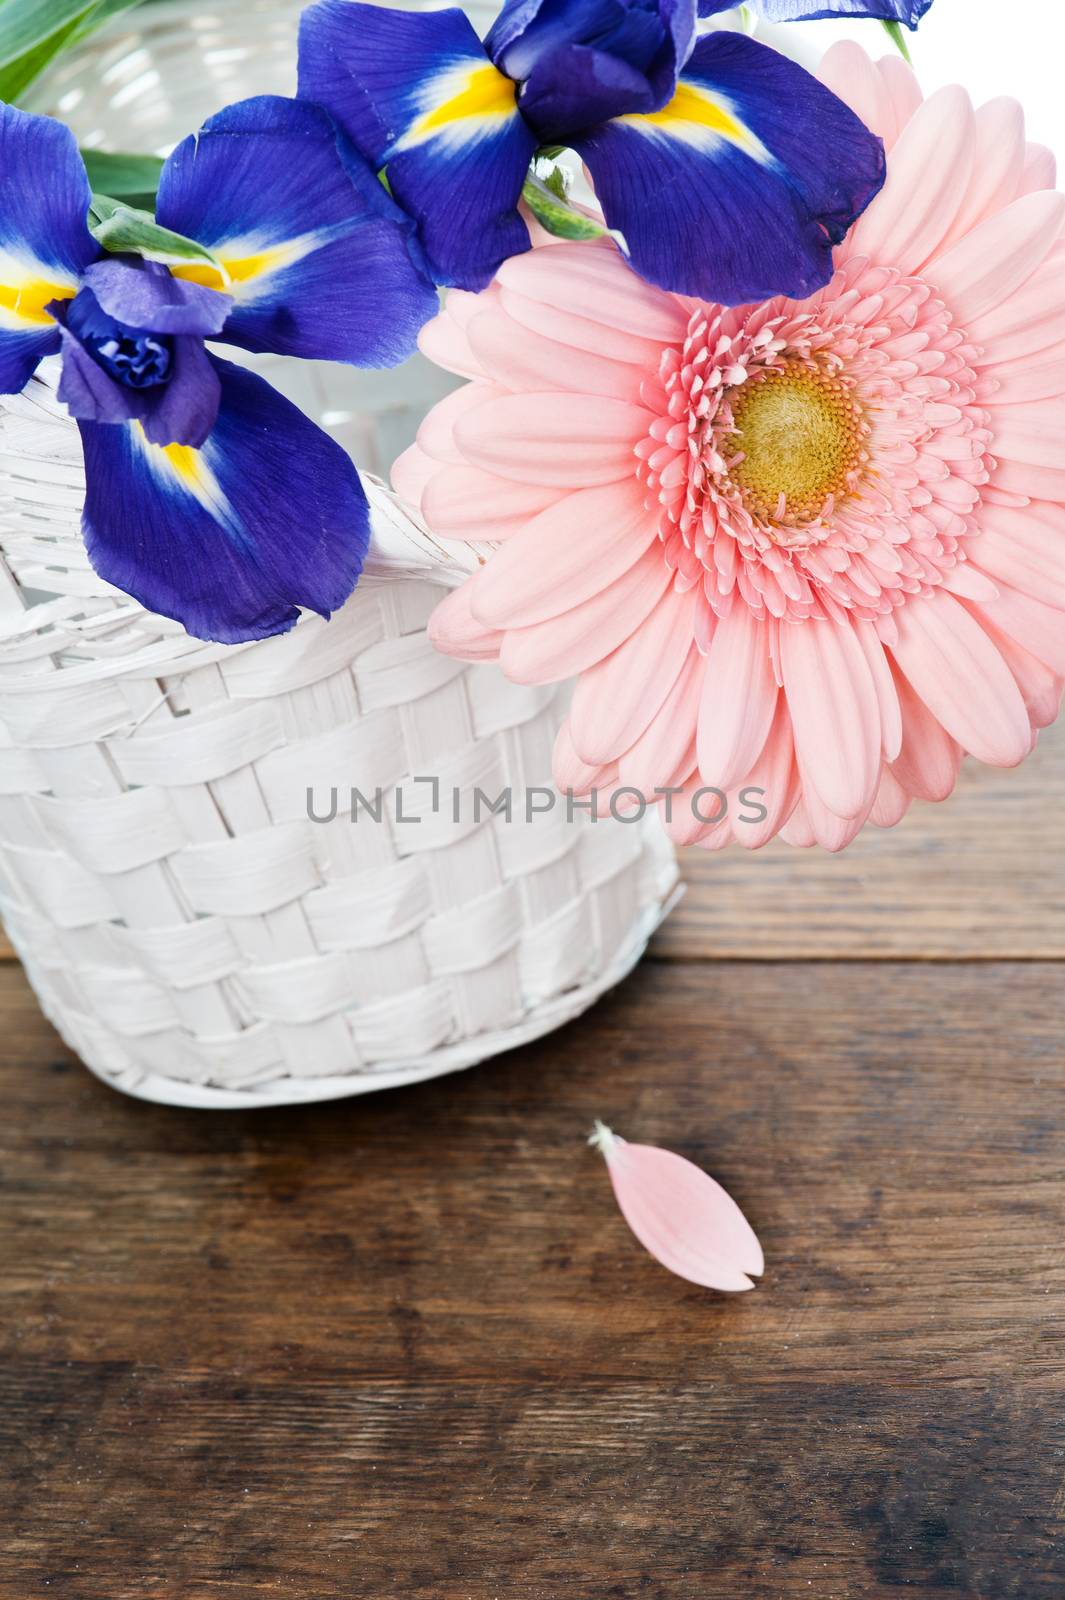 Blue irisis and pink gerbera daisy flower in white basket on wooden table. Vintage style 